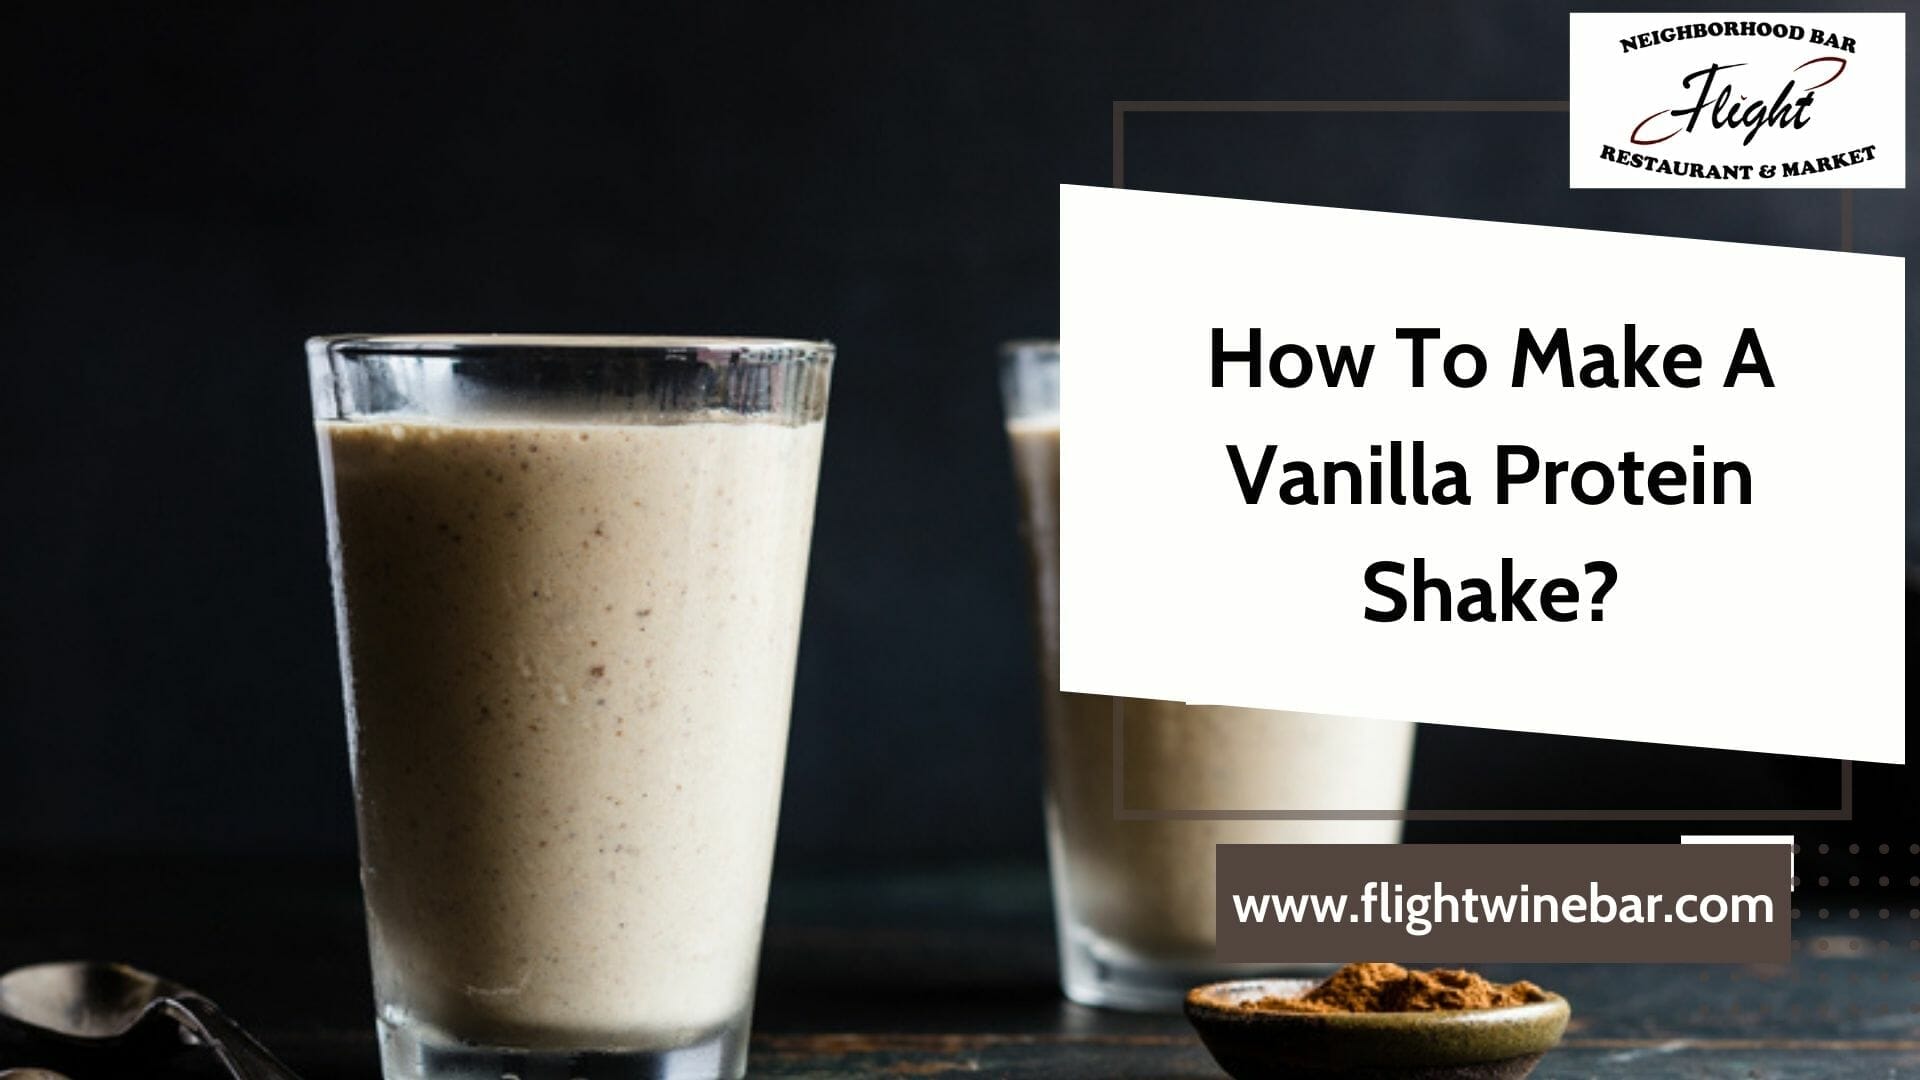 How To Make A Vanilla Protein Shake